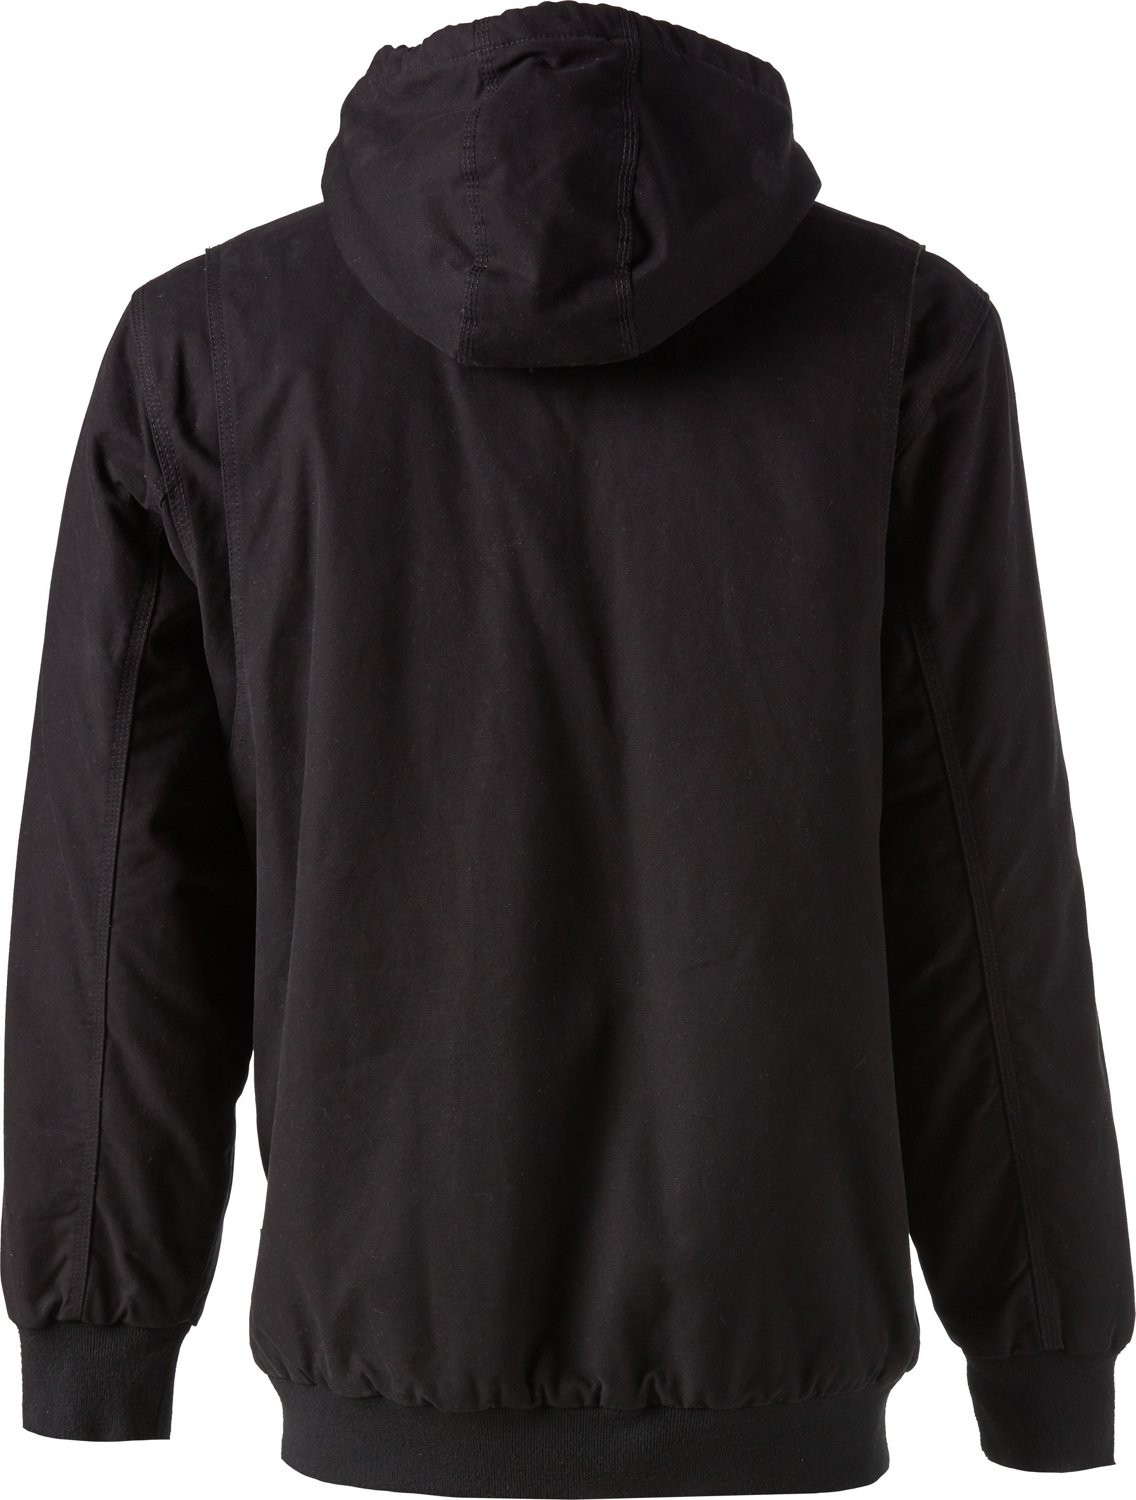 Brazos Men's Hooded Engineer Jacket | Free Shipping at Academy